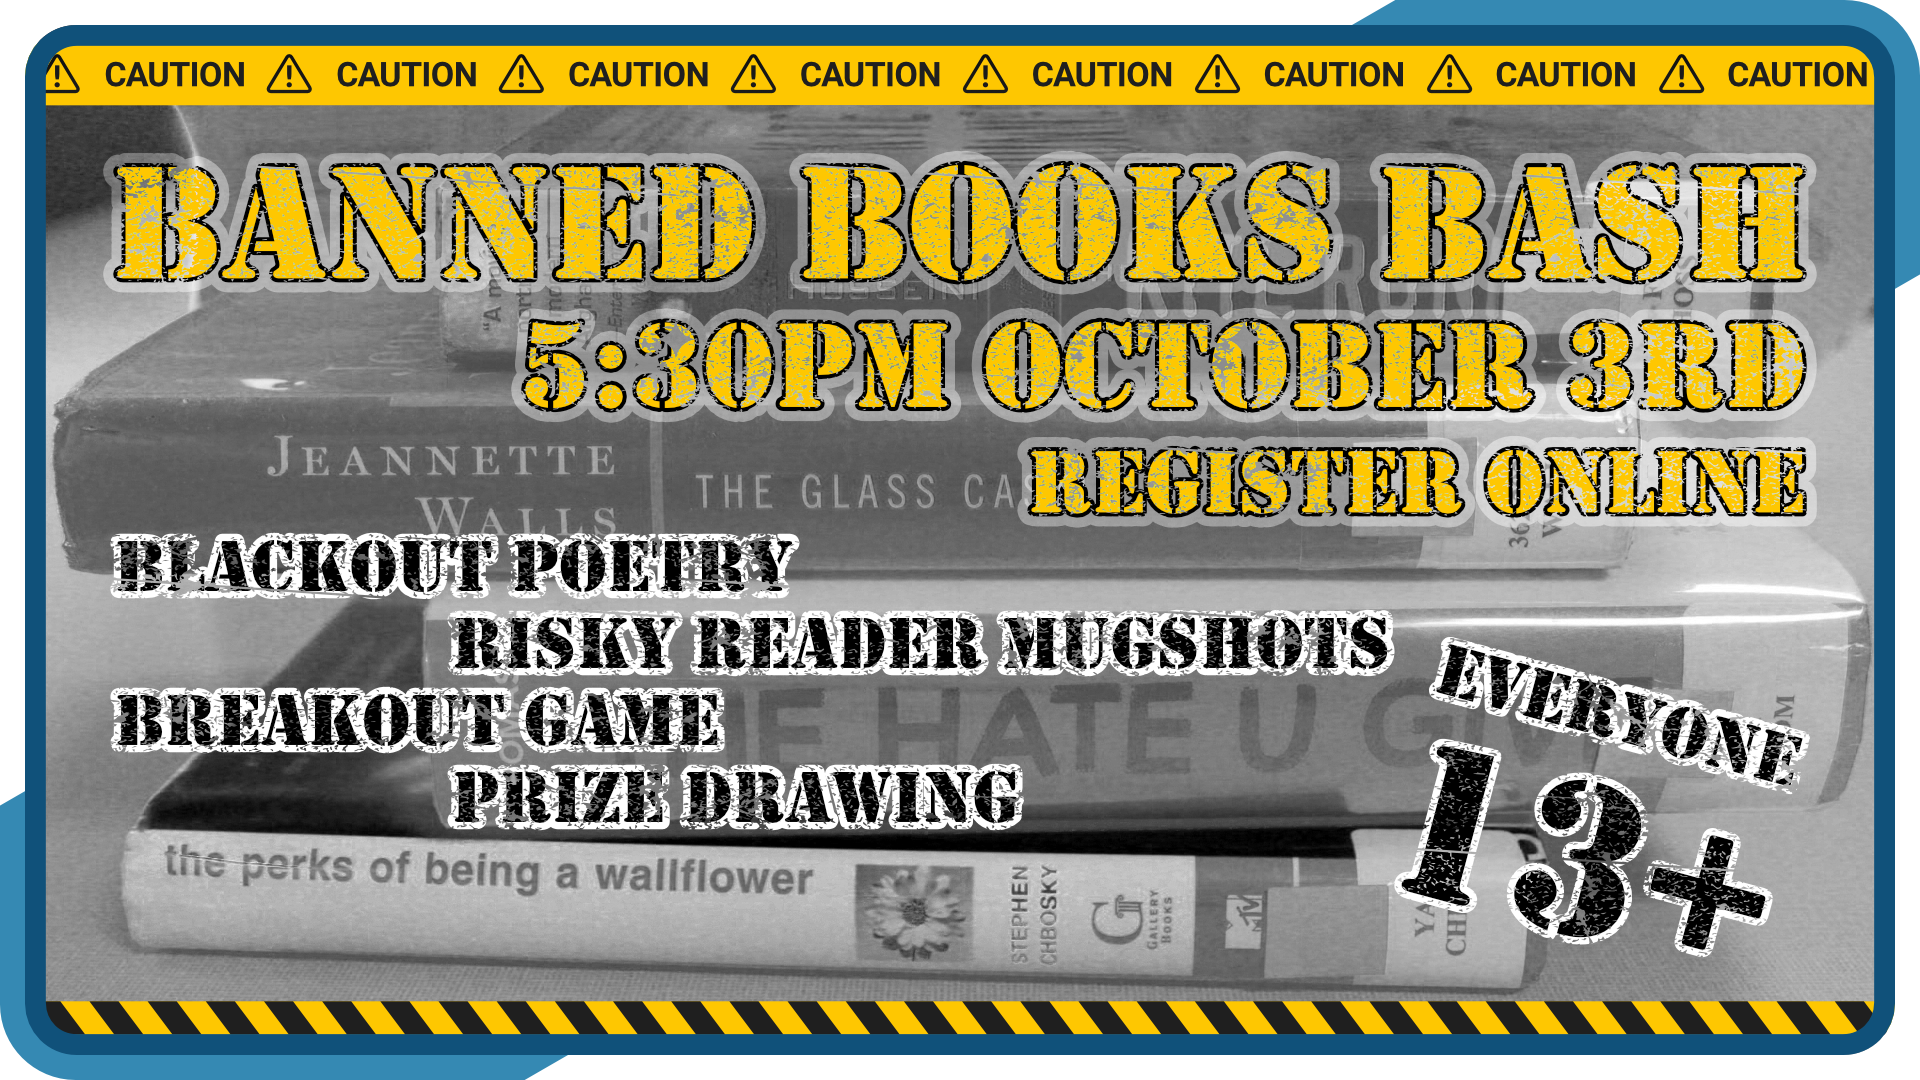 Banned Books Bash, October 3rd at 5:30pm, intended for ages 13+